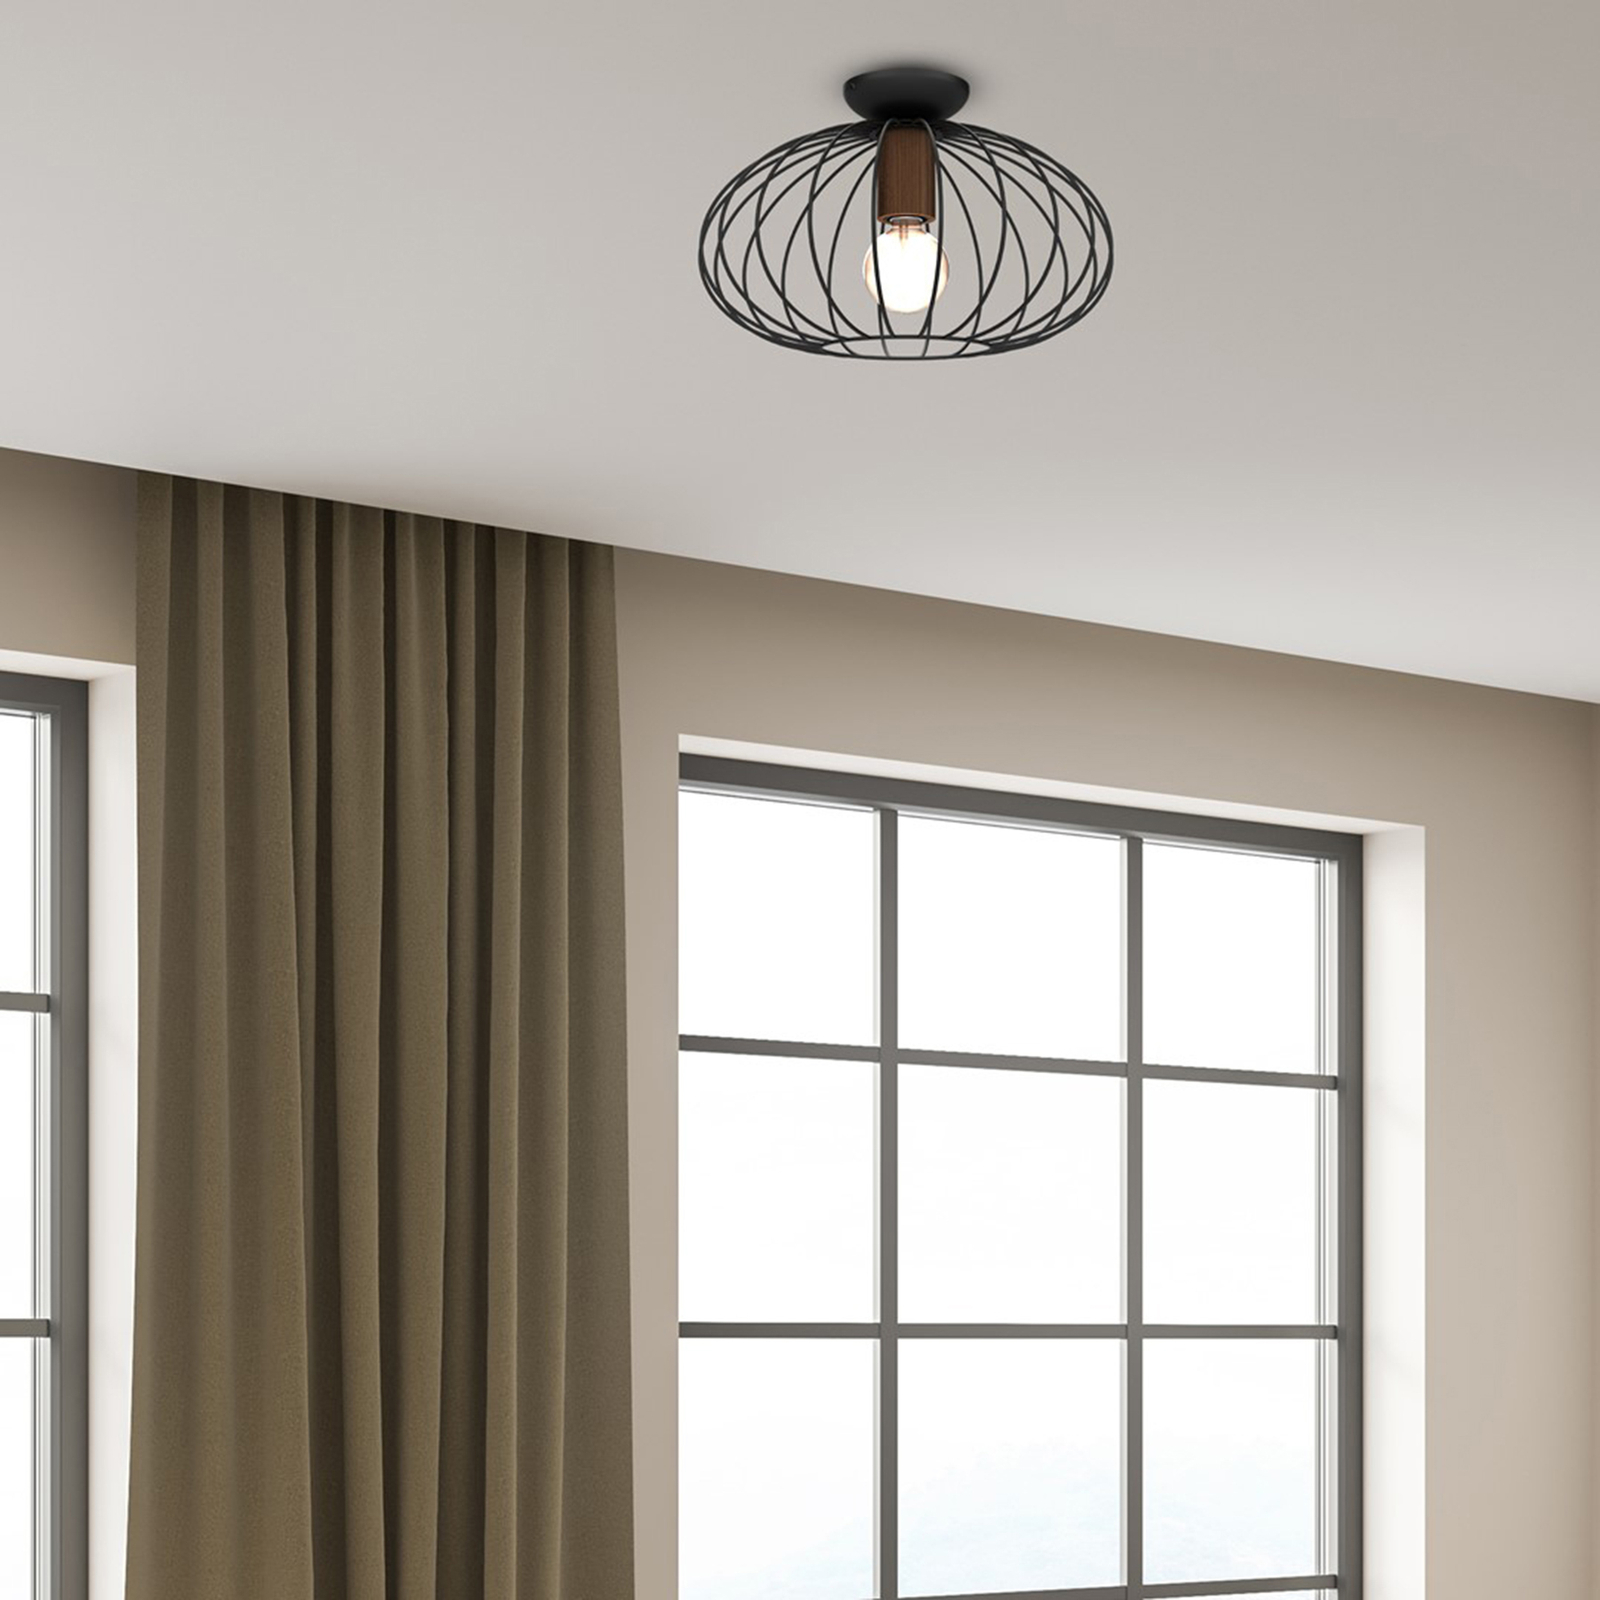 Meridiano ceiling light, cage lampshade, one-bulb